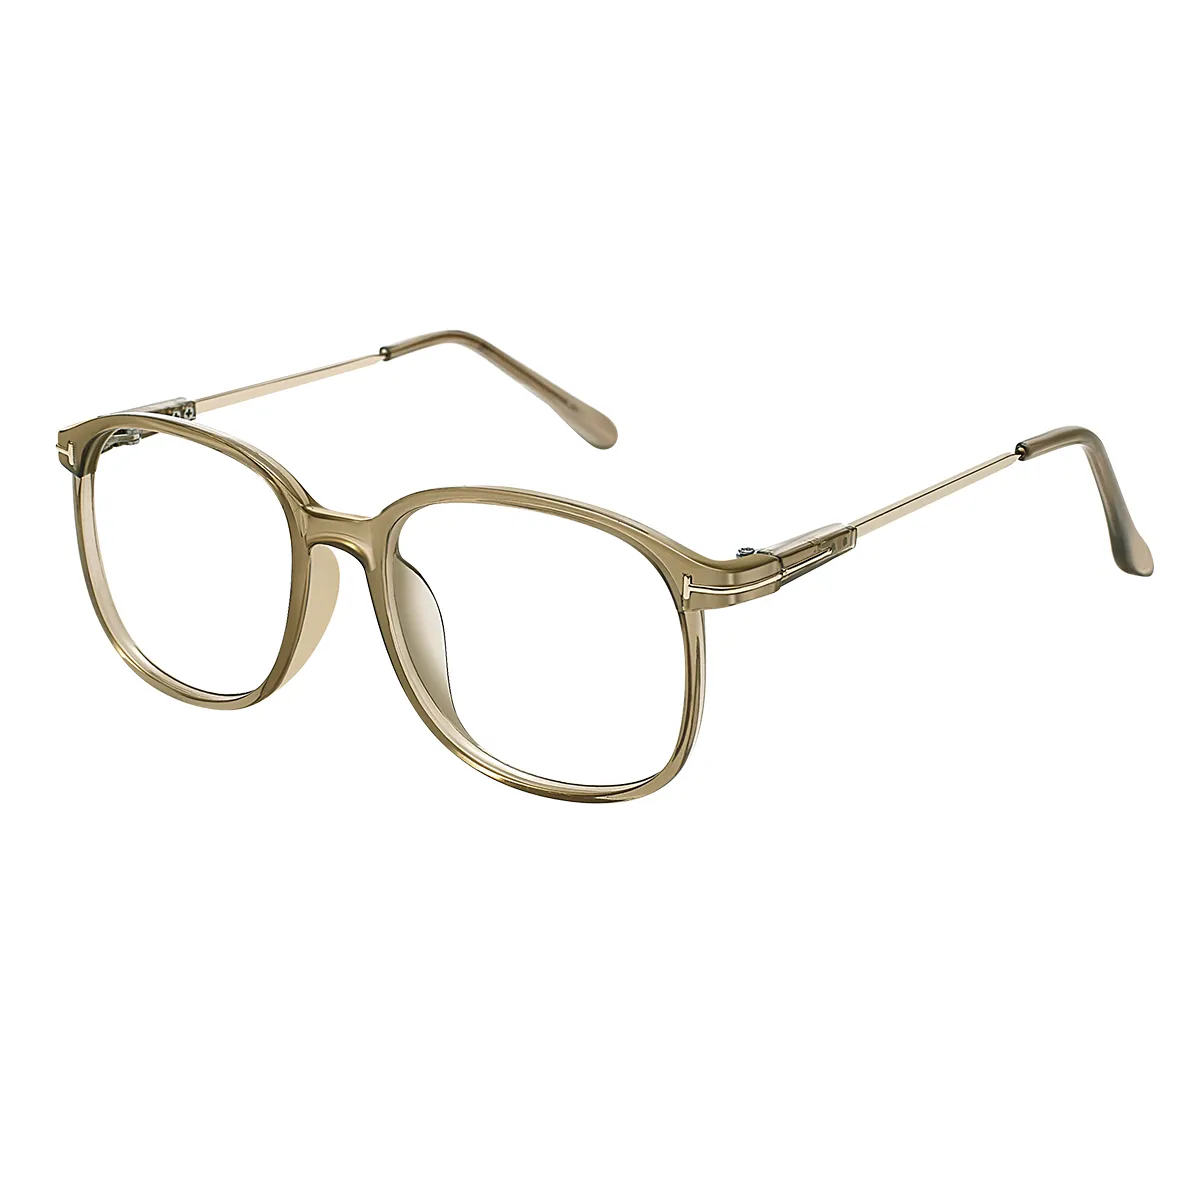 Thea - Oval Brown Glasses for Women